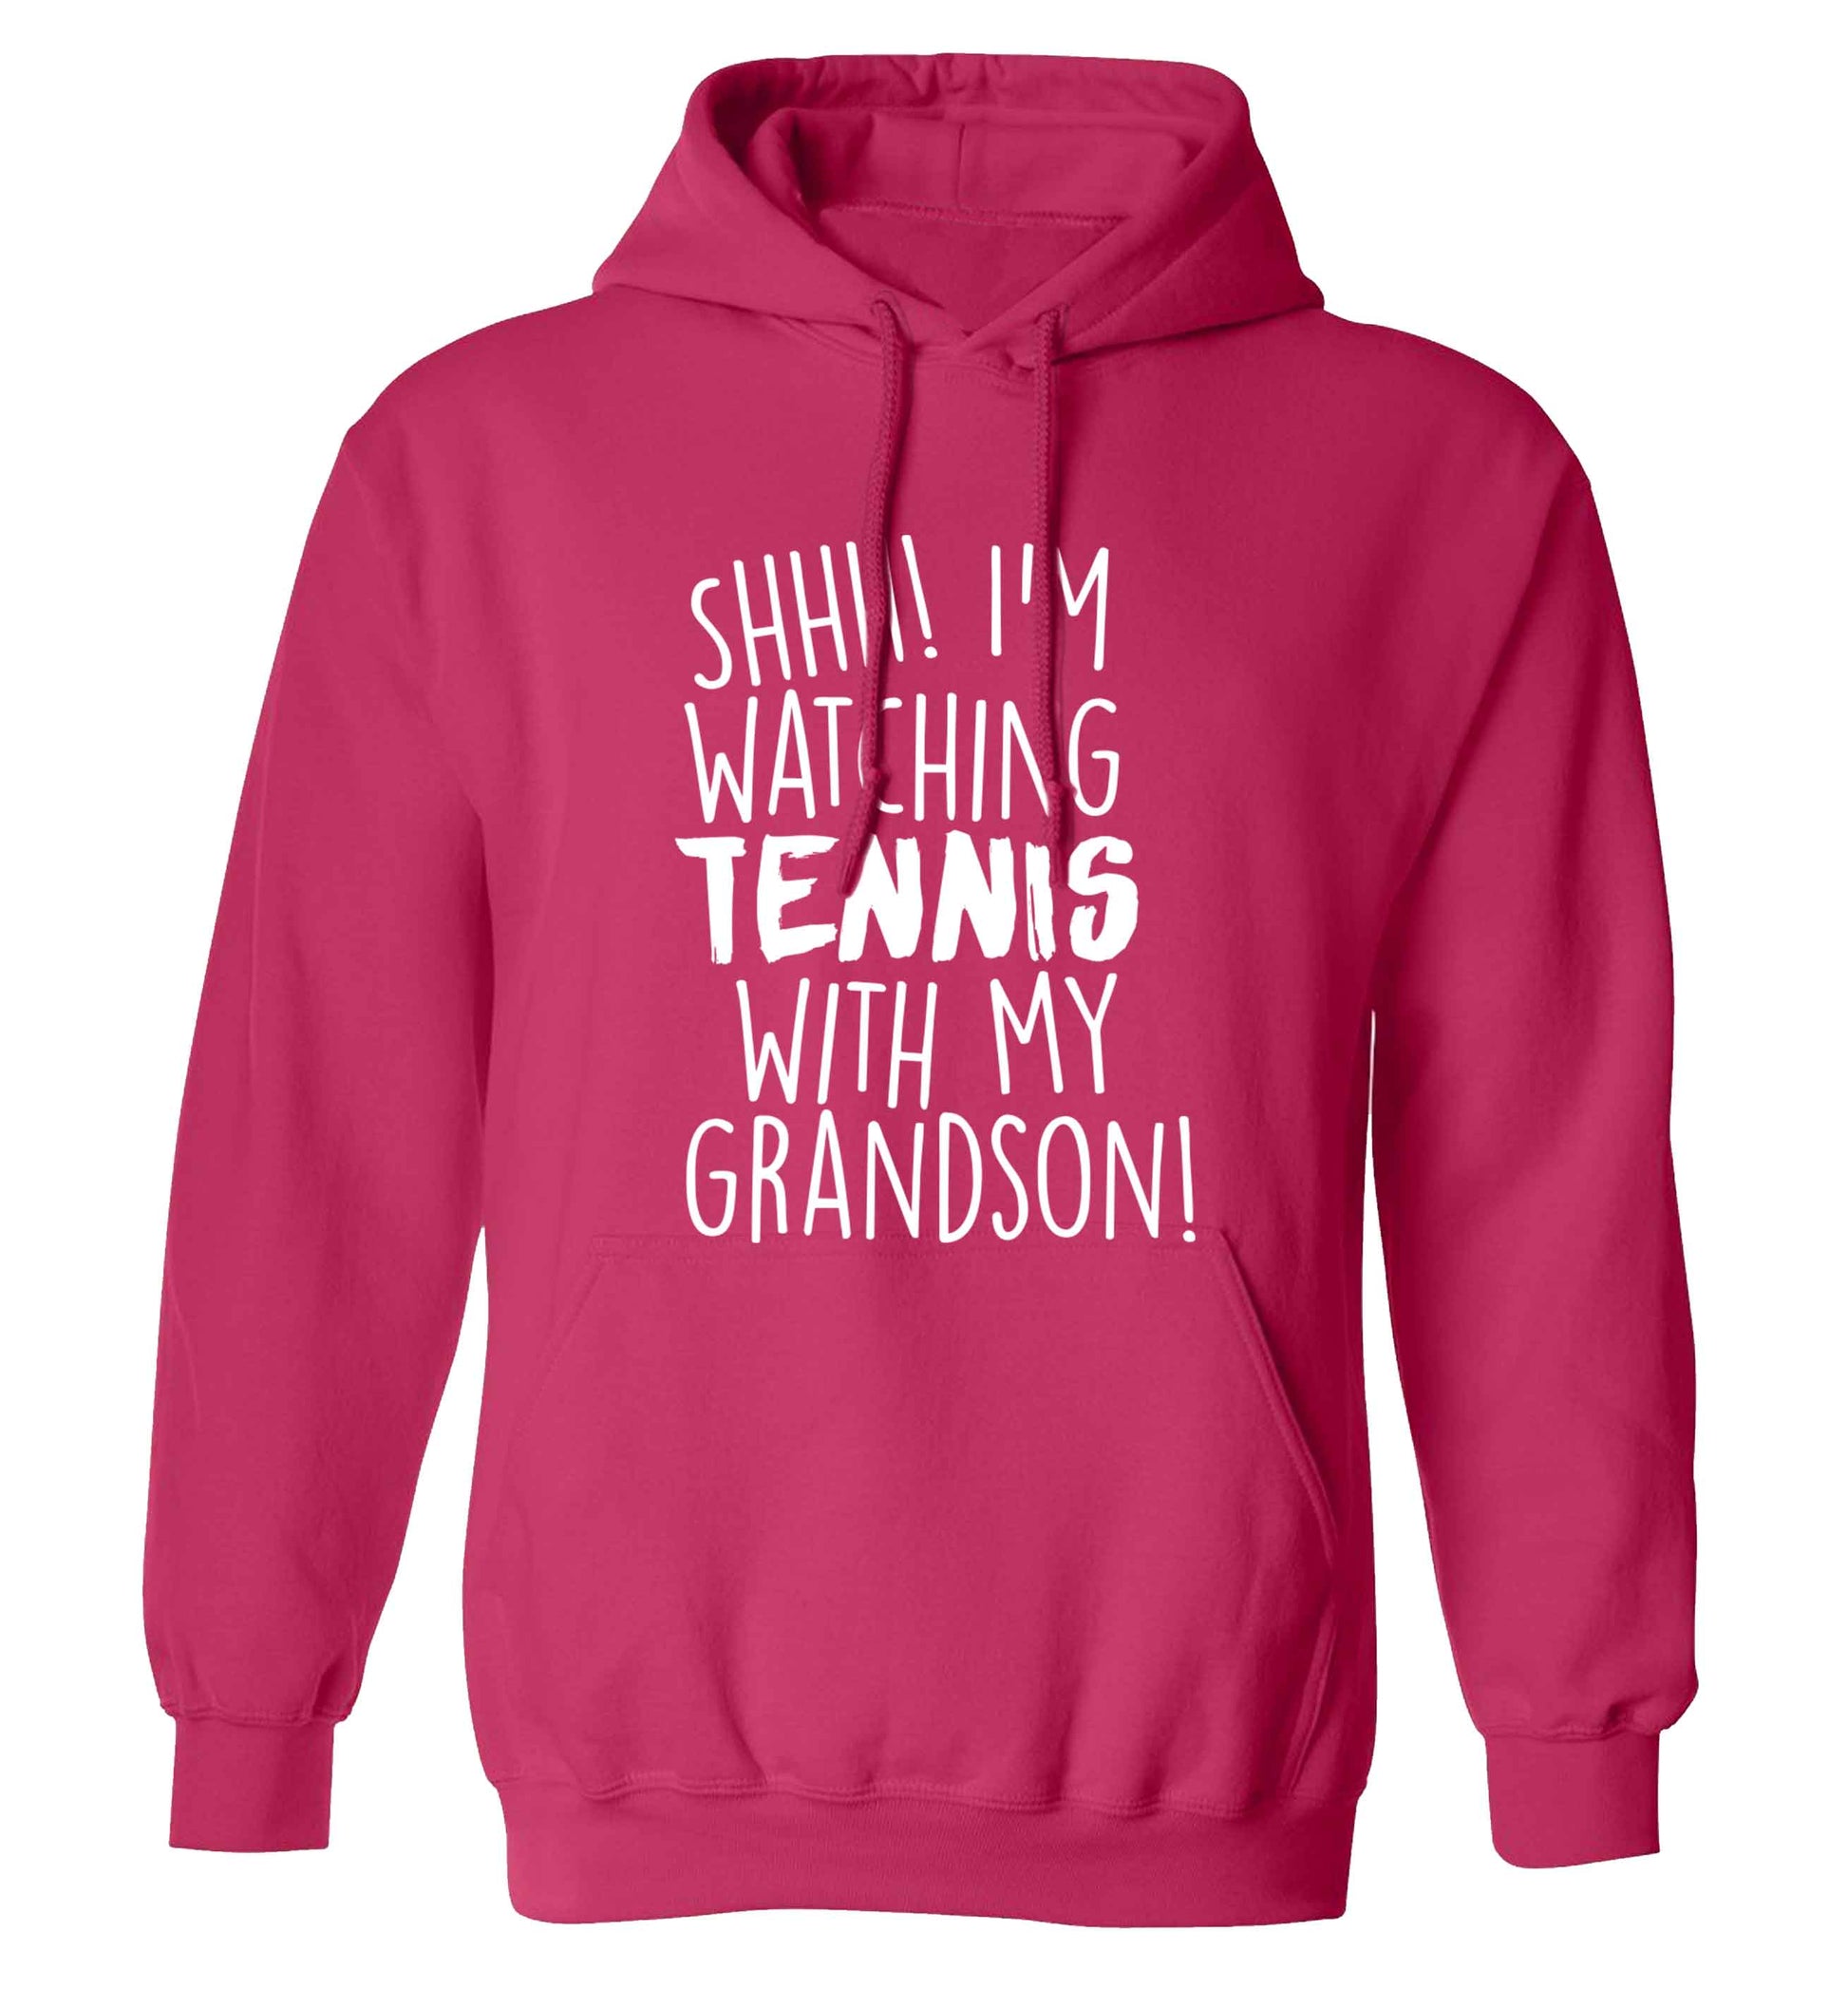 Shh! I'm watching tennis with my grandson! adults unisex pink hoodie 2XL